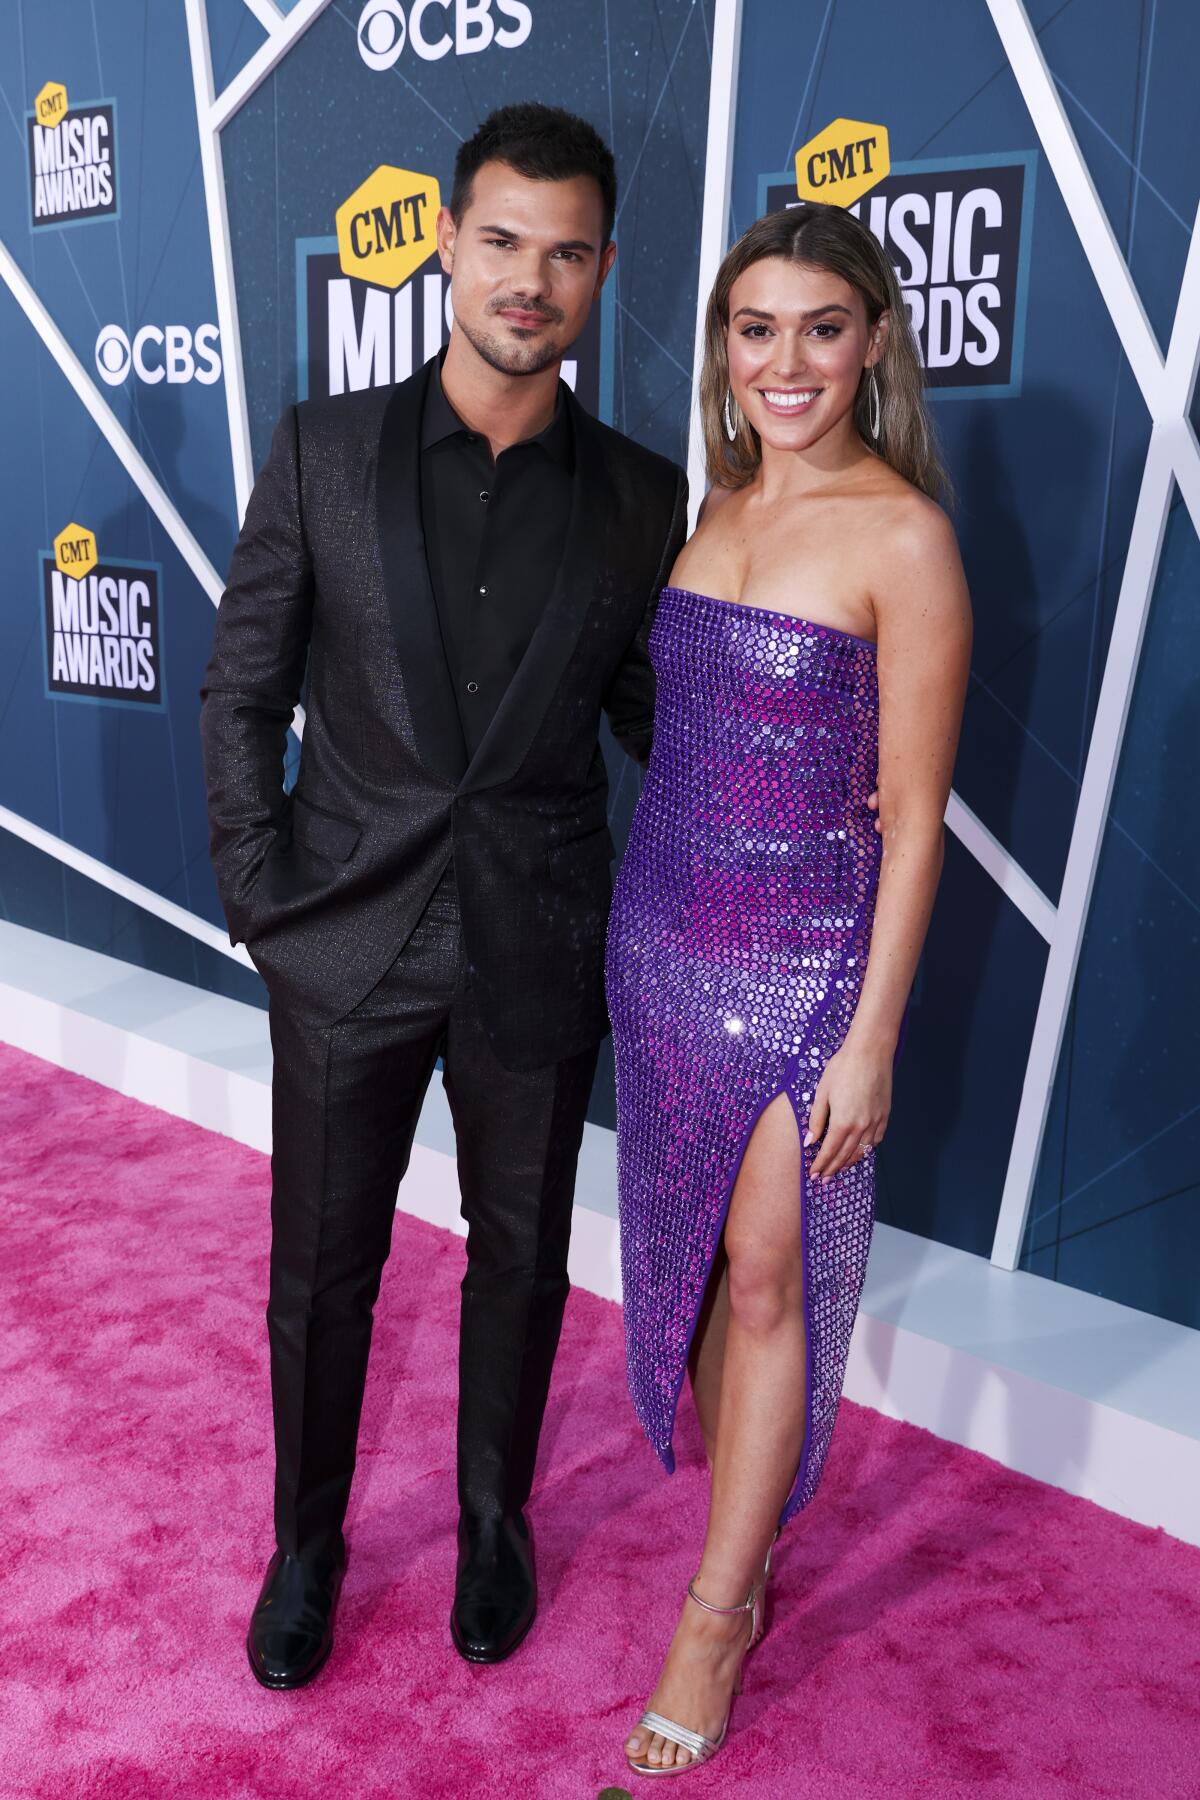 A young man wearing all black and a young woman wearing a sparkly strapless dress pose on a red carpet at an awards show